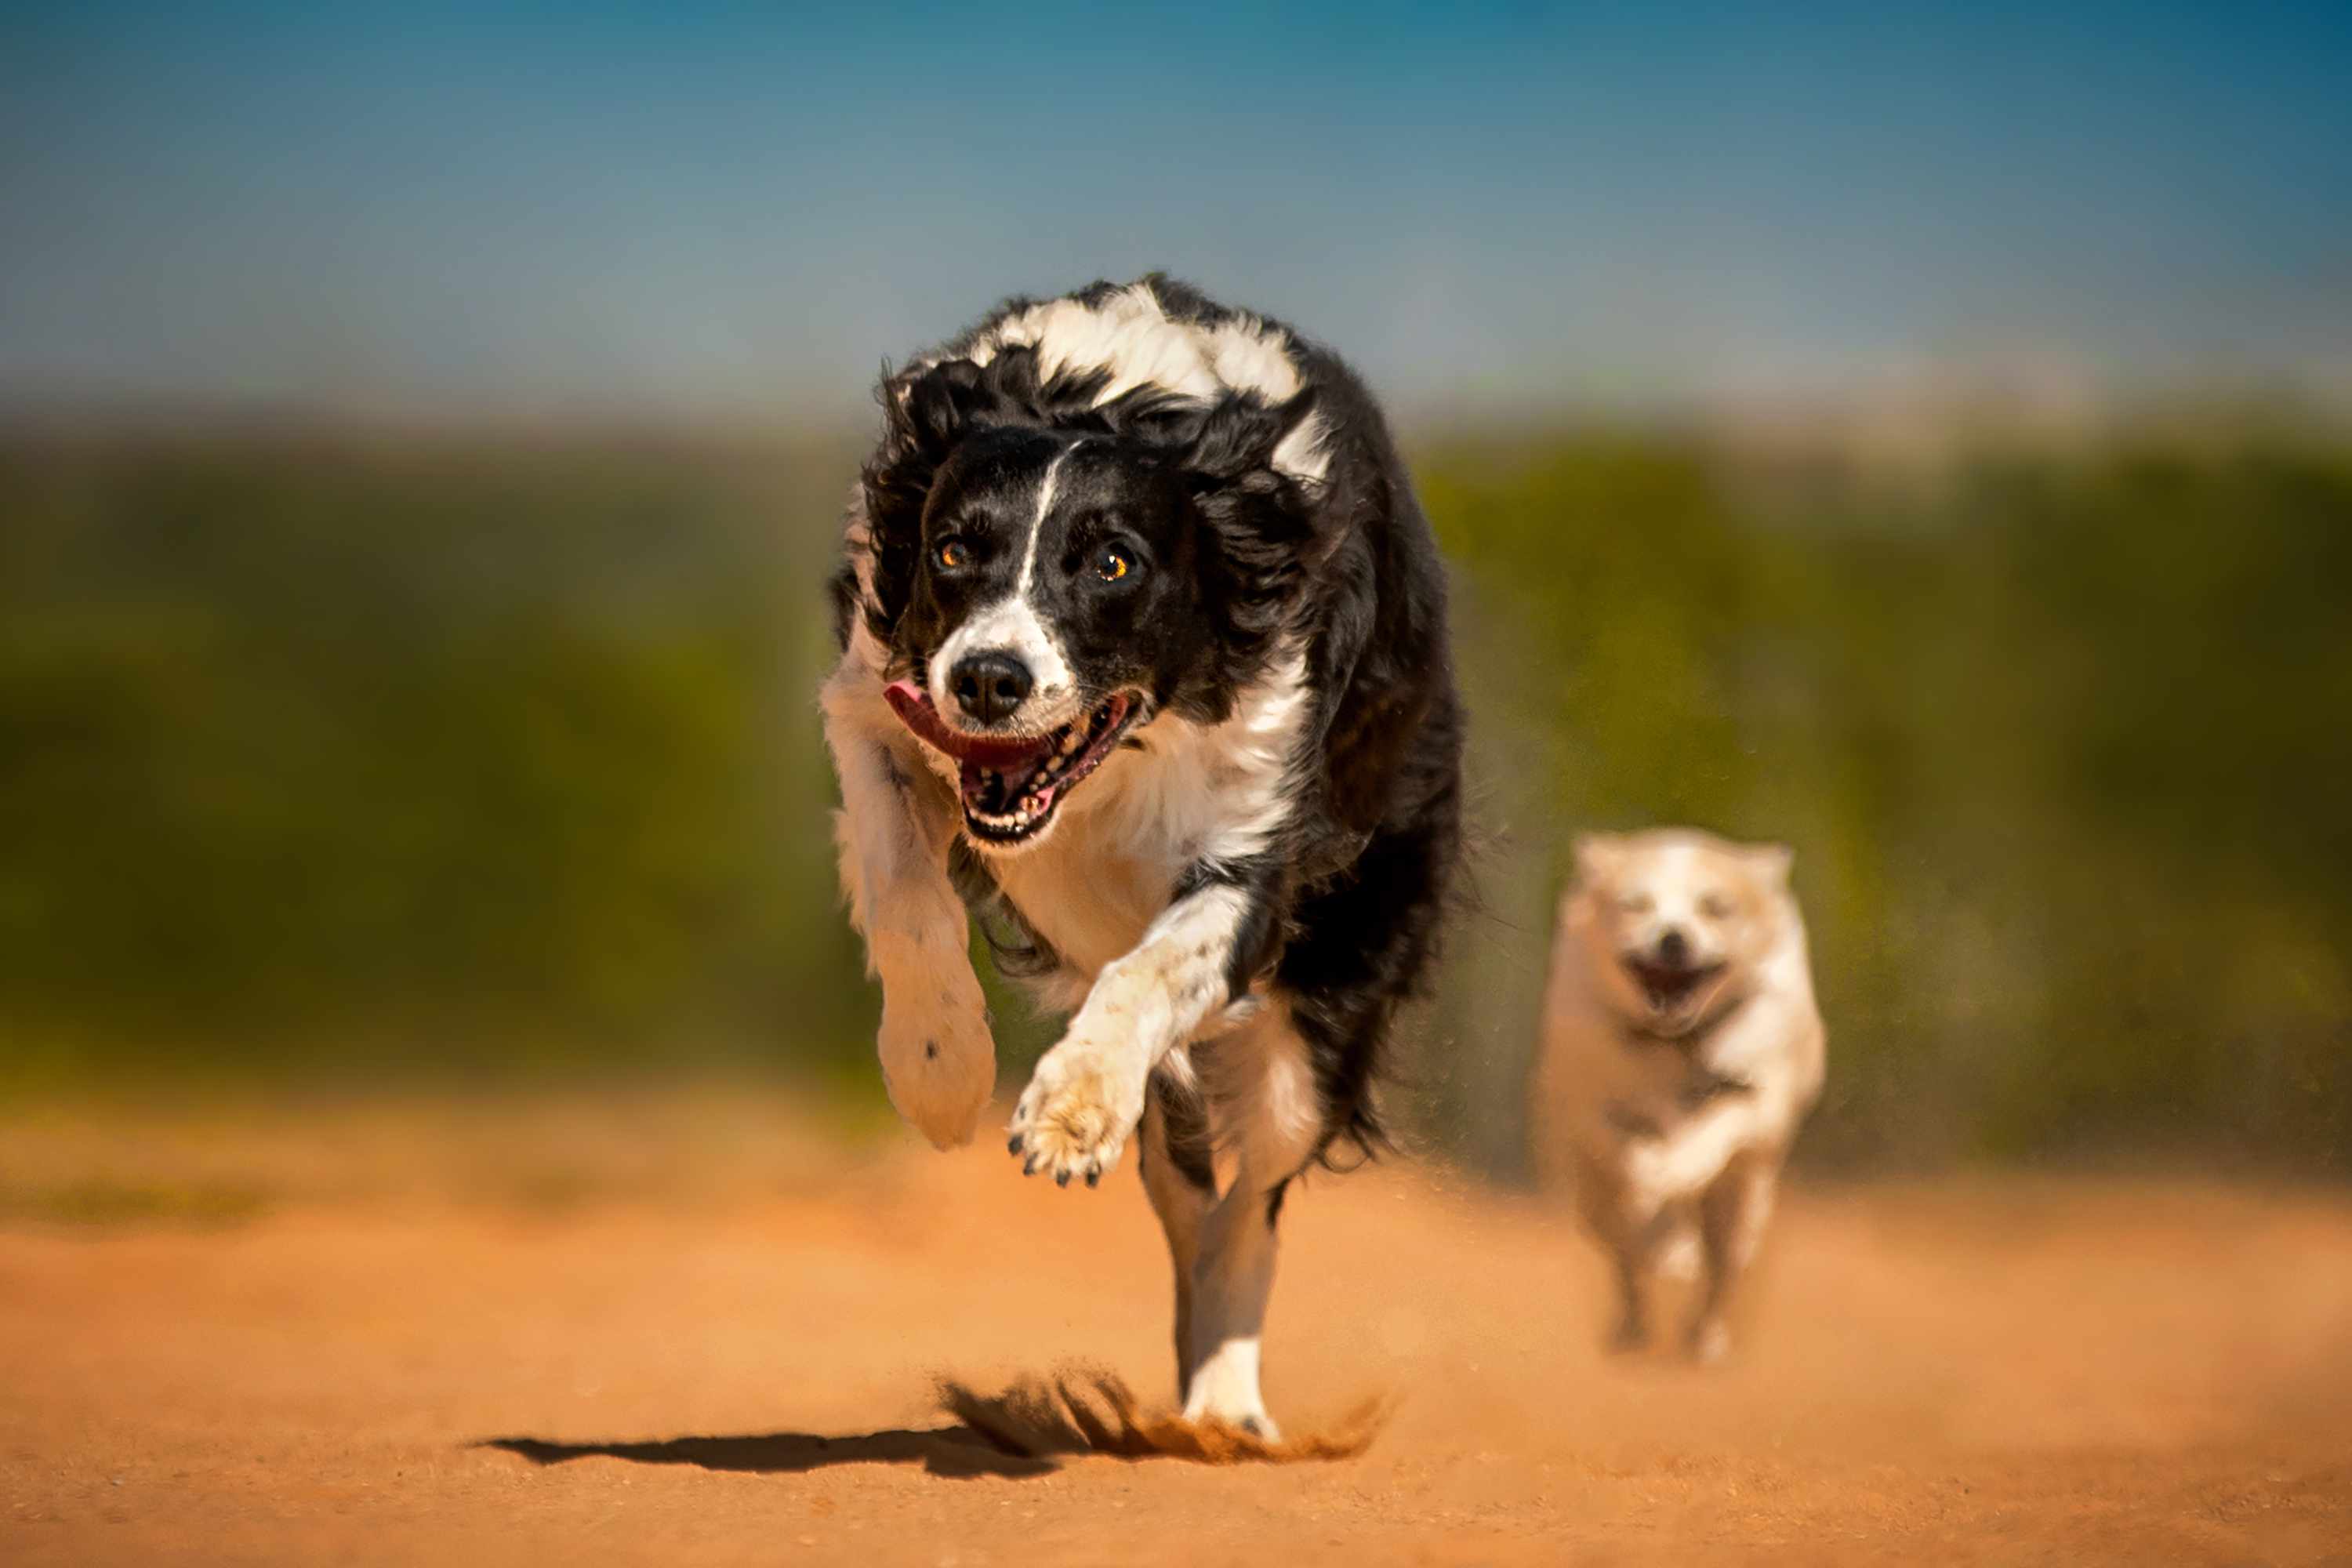 Border Collie running on sand with another dog chasing behind